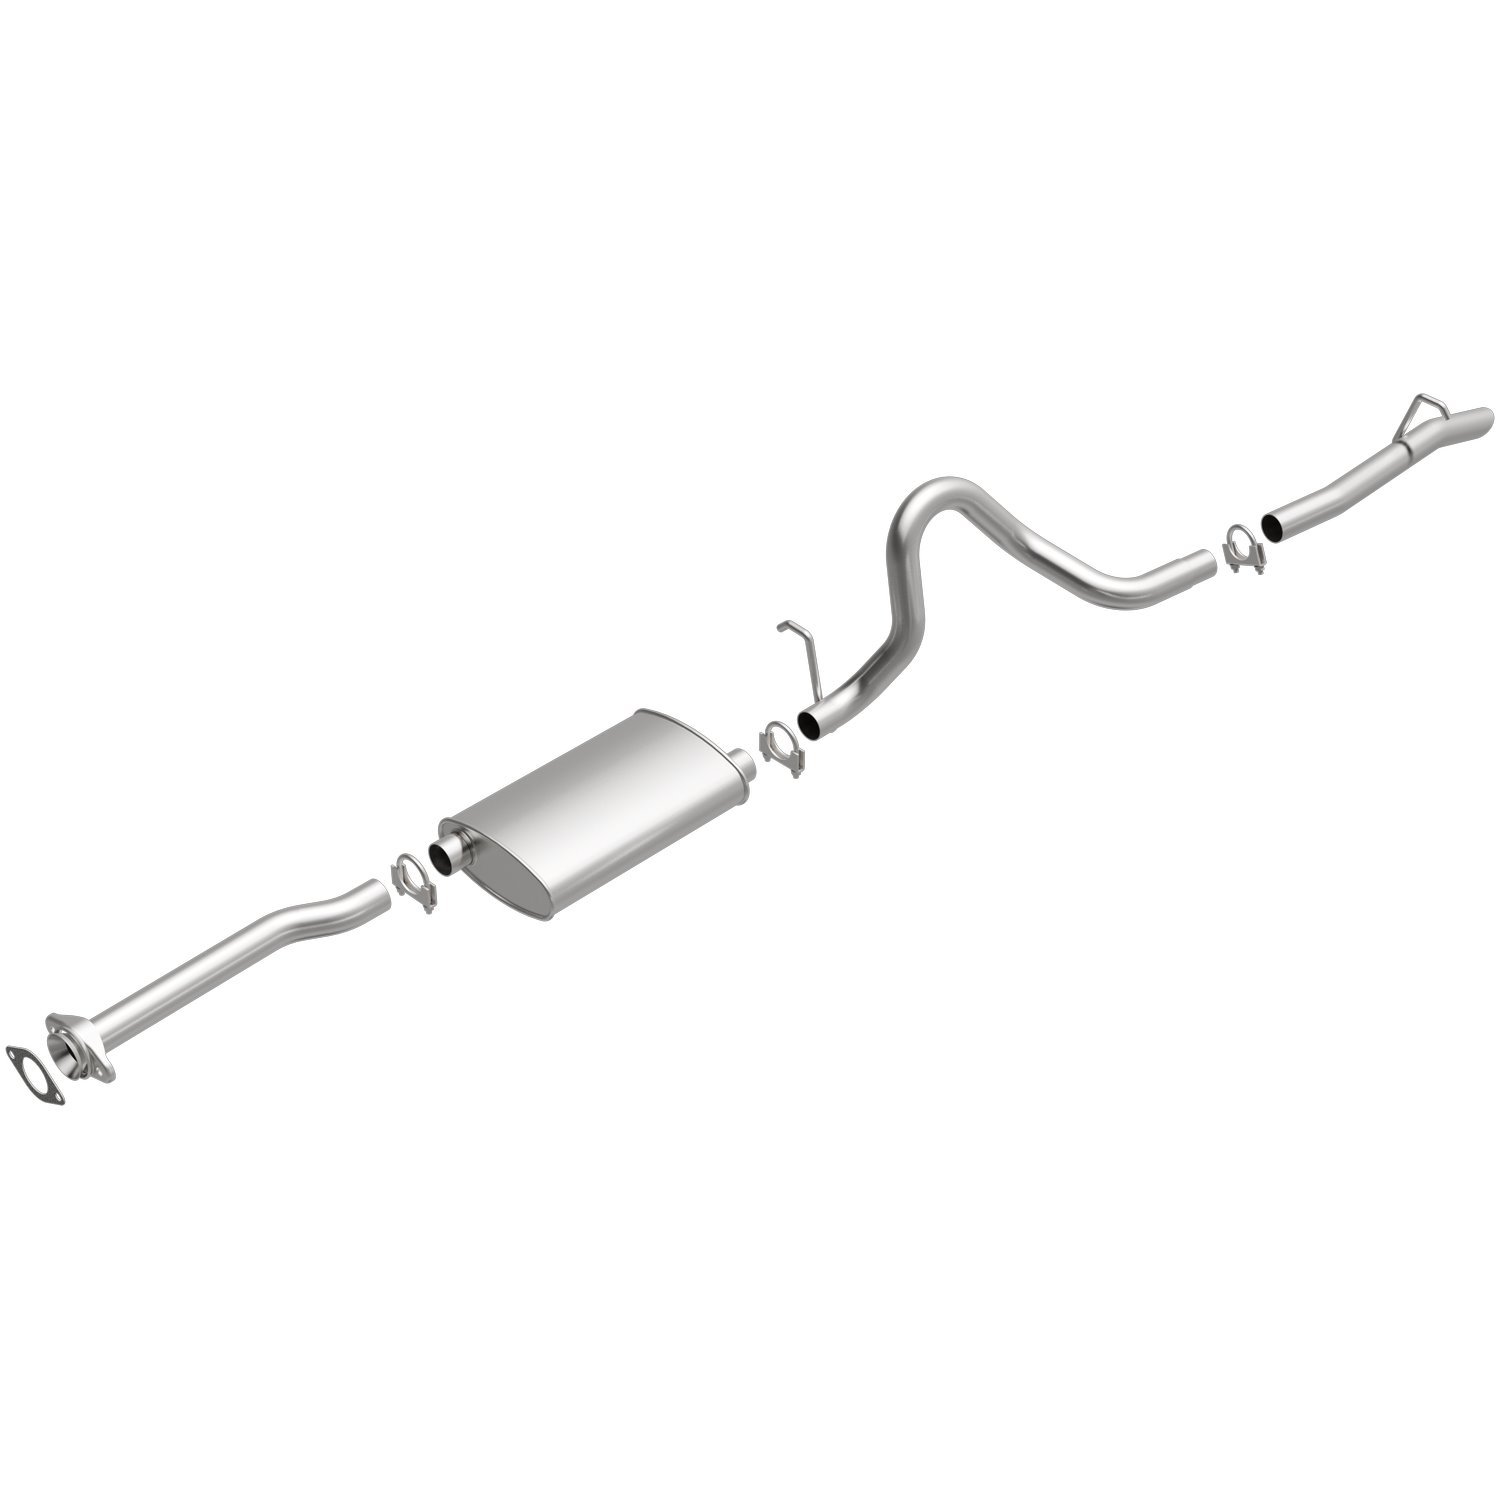 Direct-Fit Exhaust Kit, 1994-1997 Ford Mustang 3.8L